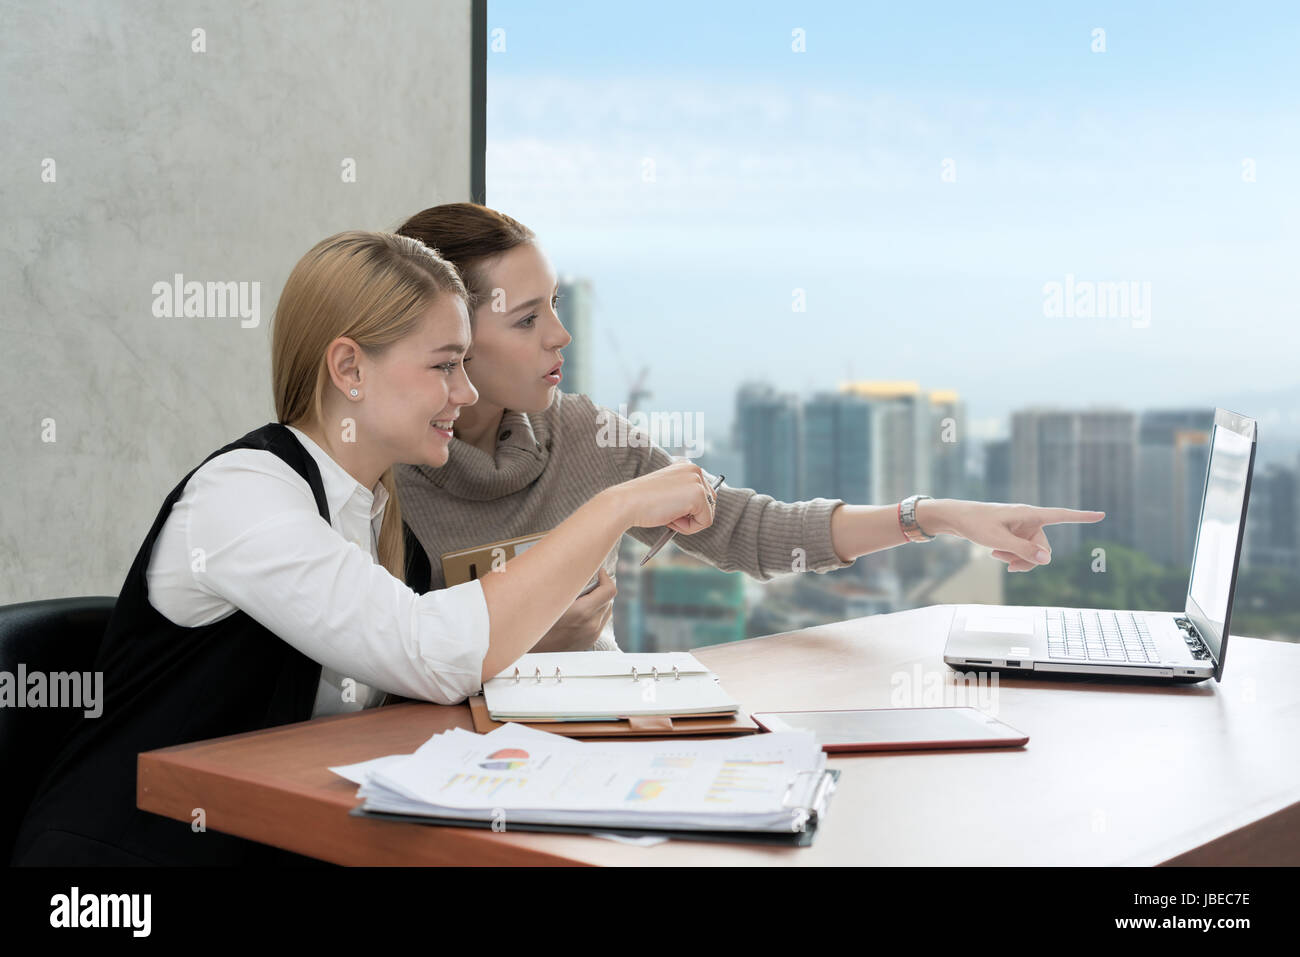 Caucasian business women working together at the office on a laptop computer. Business partnership people concept. Stock Photo